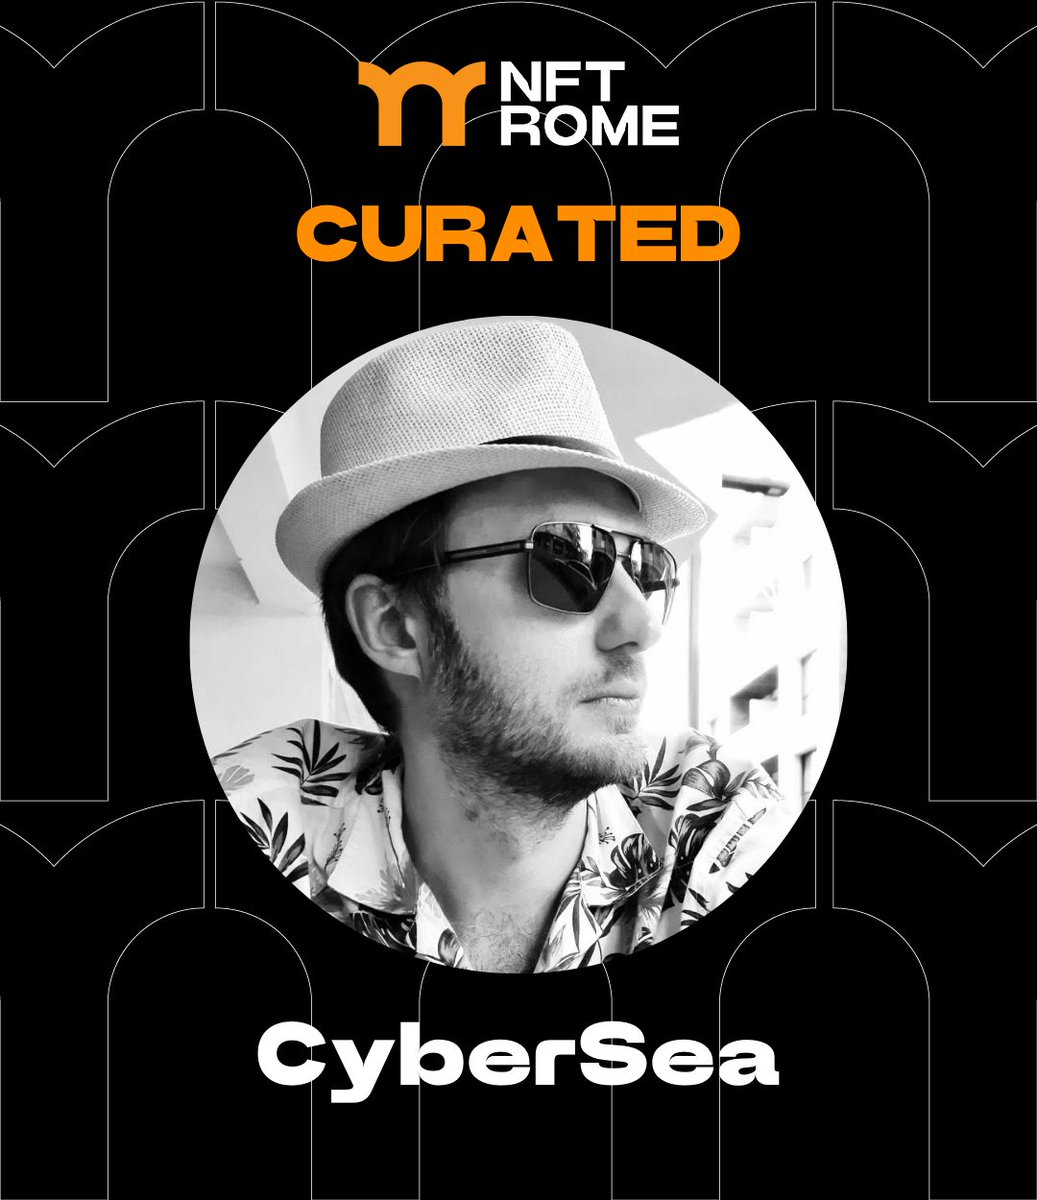 GM Web3 Fam ☕️ Excited to announce that @CyberSeaNFT is part of our curated initiative at NFT Rome 🇮🇹 CyberSea is a generative artist, collector and developer, with works on fxhash and Alba. 😍